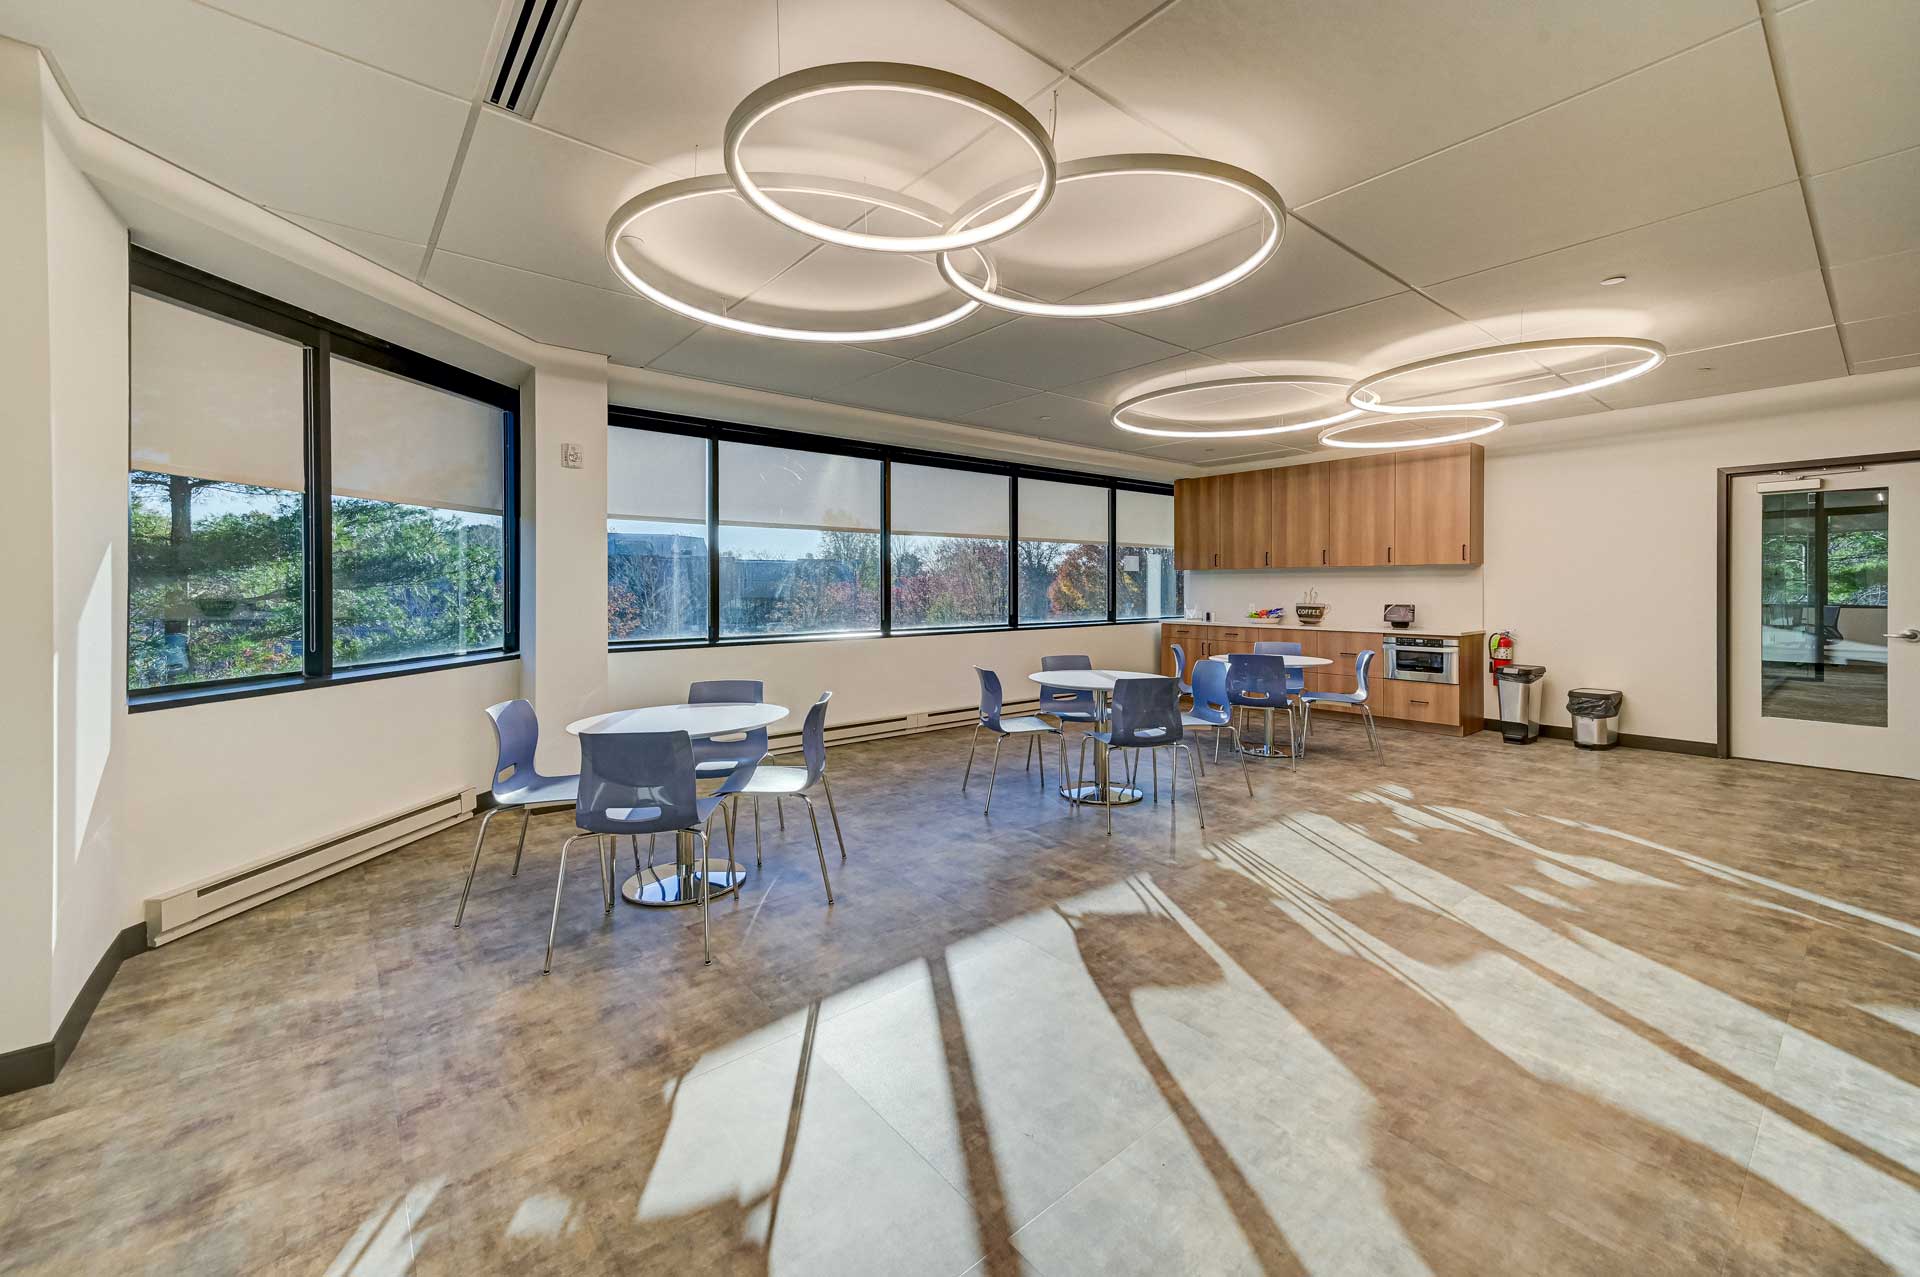 Light filled modern workplace designed by RI Workplace with circular ceiling lights